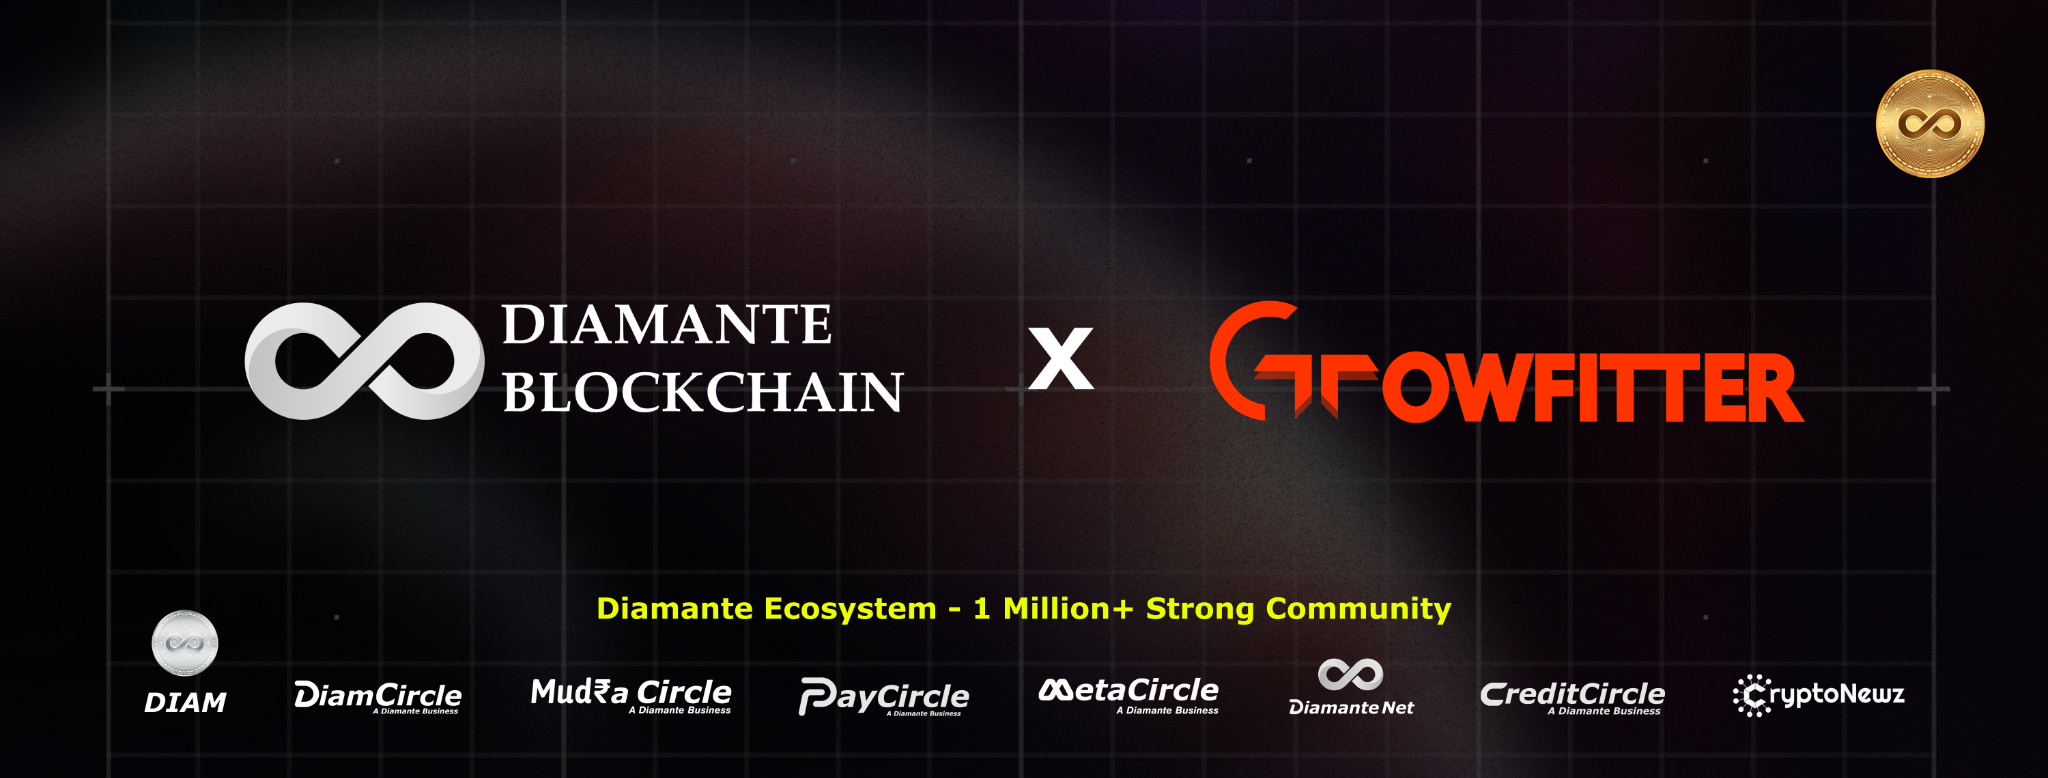 Diamante Blockchain partners with Growfitter showcasing a strong ecosystem of over 1 million members, featuring various Diamante businesses including DIAM, DiamCircle, MudraCircle, PayCircle, MetaCircle, Diamante Net, CreditCircle, and CryptoNewz